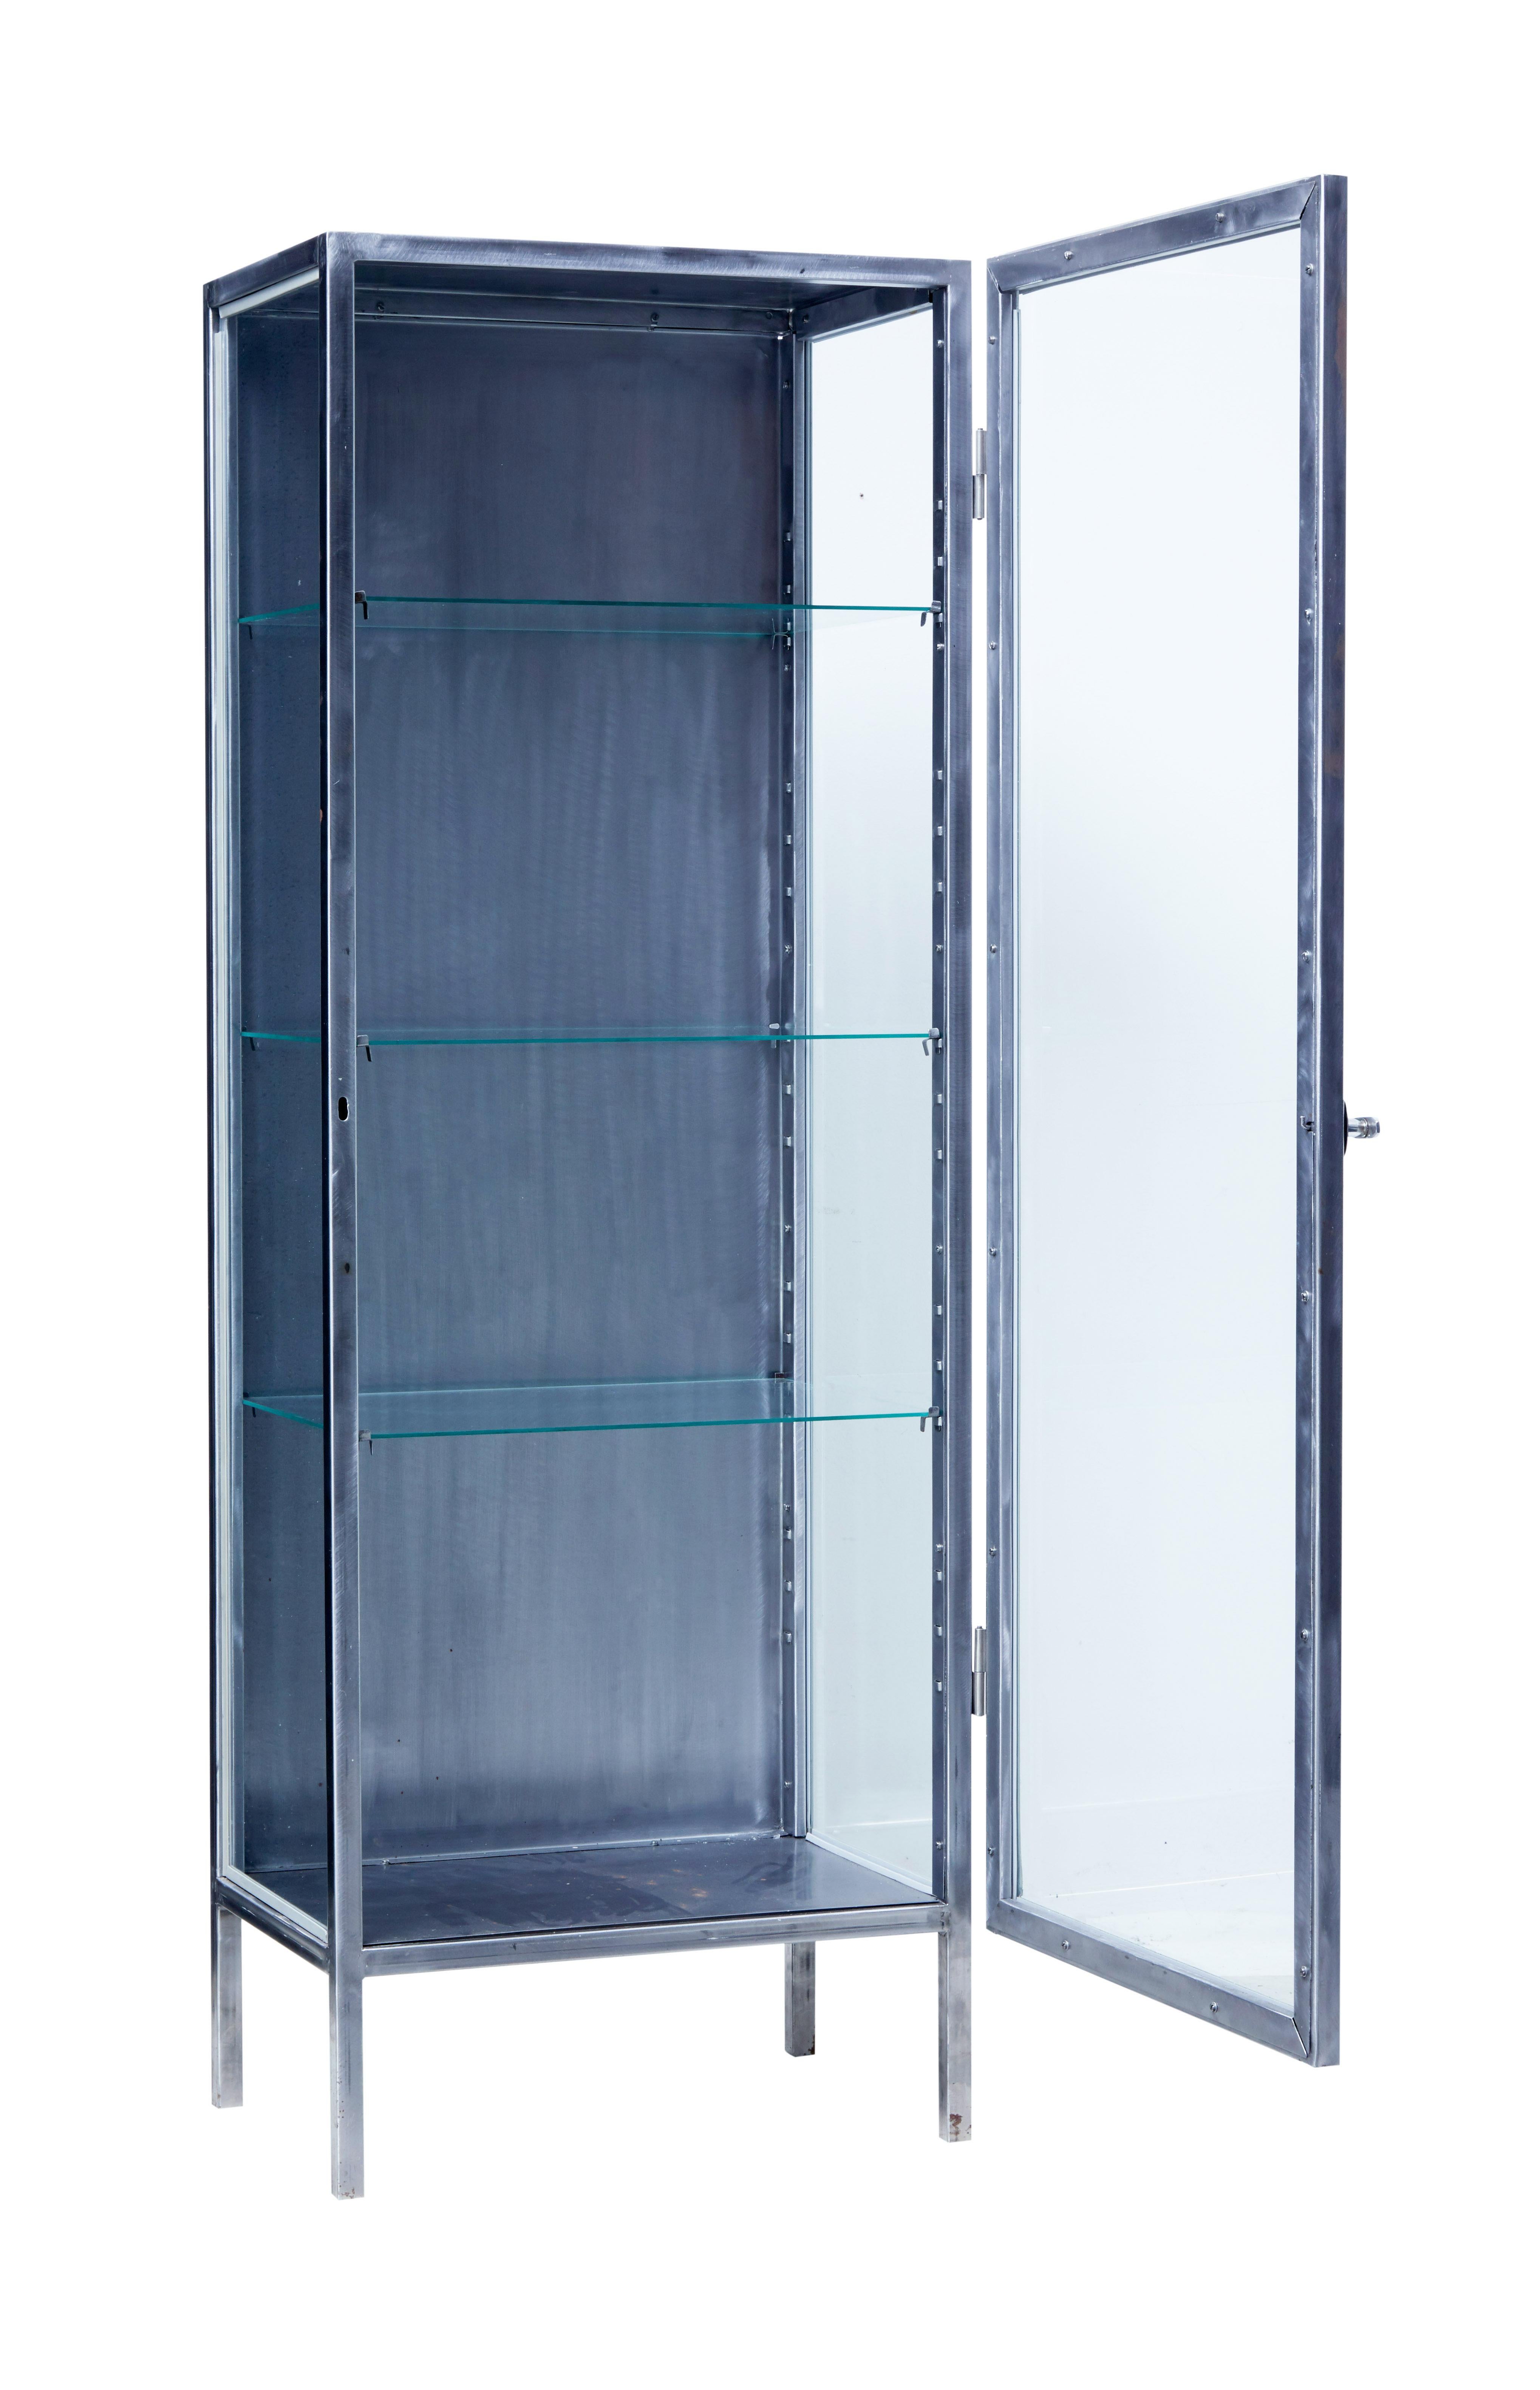 Good quality 1940s Scandinavian steel medical cabinet.

Tubular frame, with a single door to the front which allows access to 3 glass shelves.

Ideal for a retail display or for use in the home.

Minor loss to 1 glass shelf on the back edge,